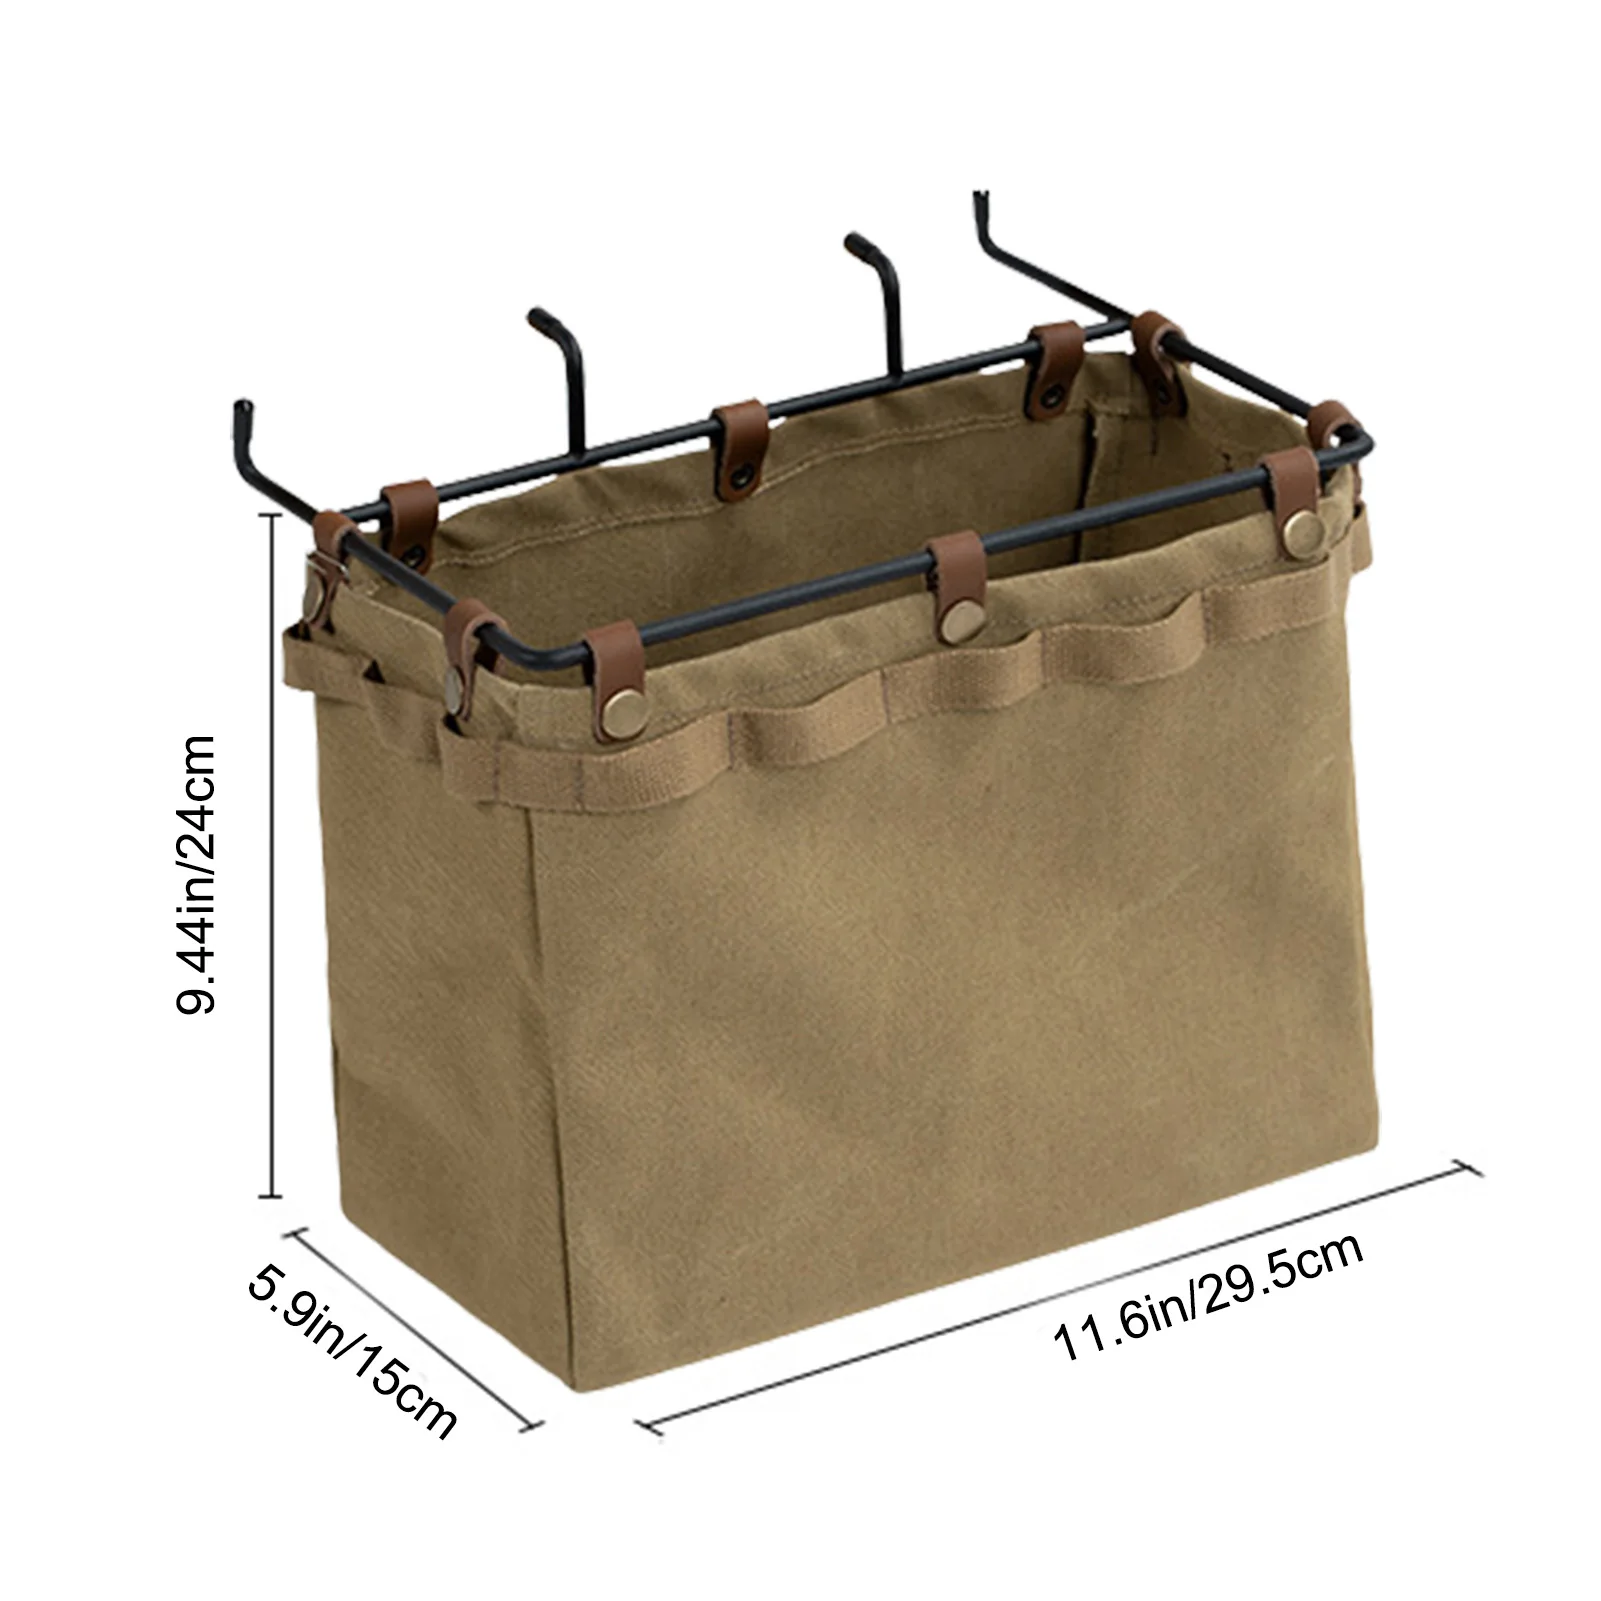 Camping Table Side Hangings Bag Camping Storage Bag Desk Hang Pouch Bags Desktop Organizer Basket For Camping Accessories Picnic images - 6